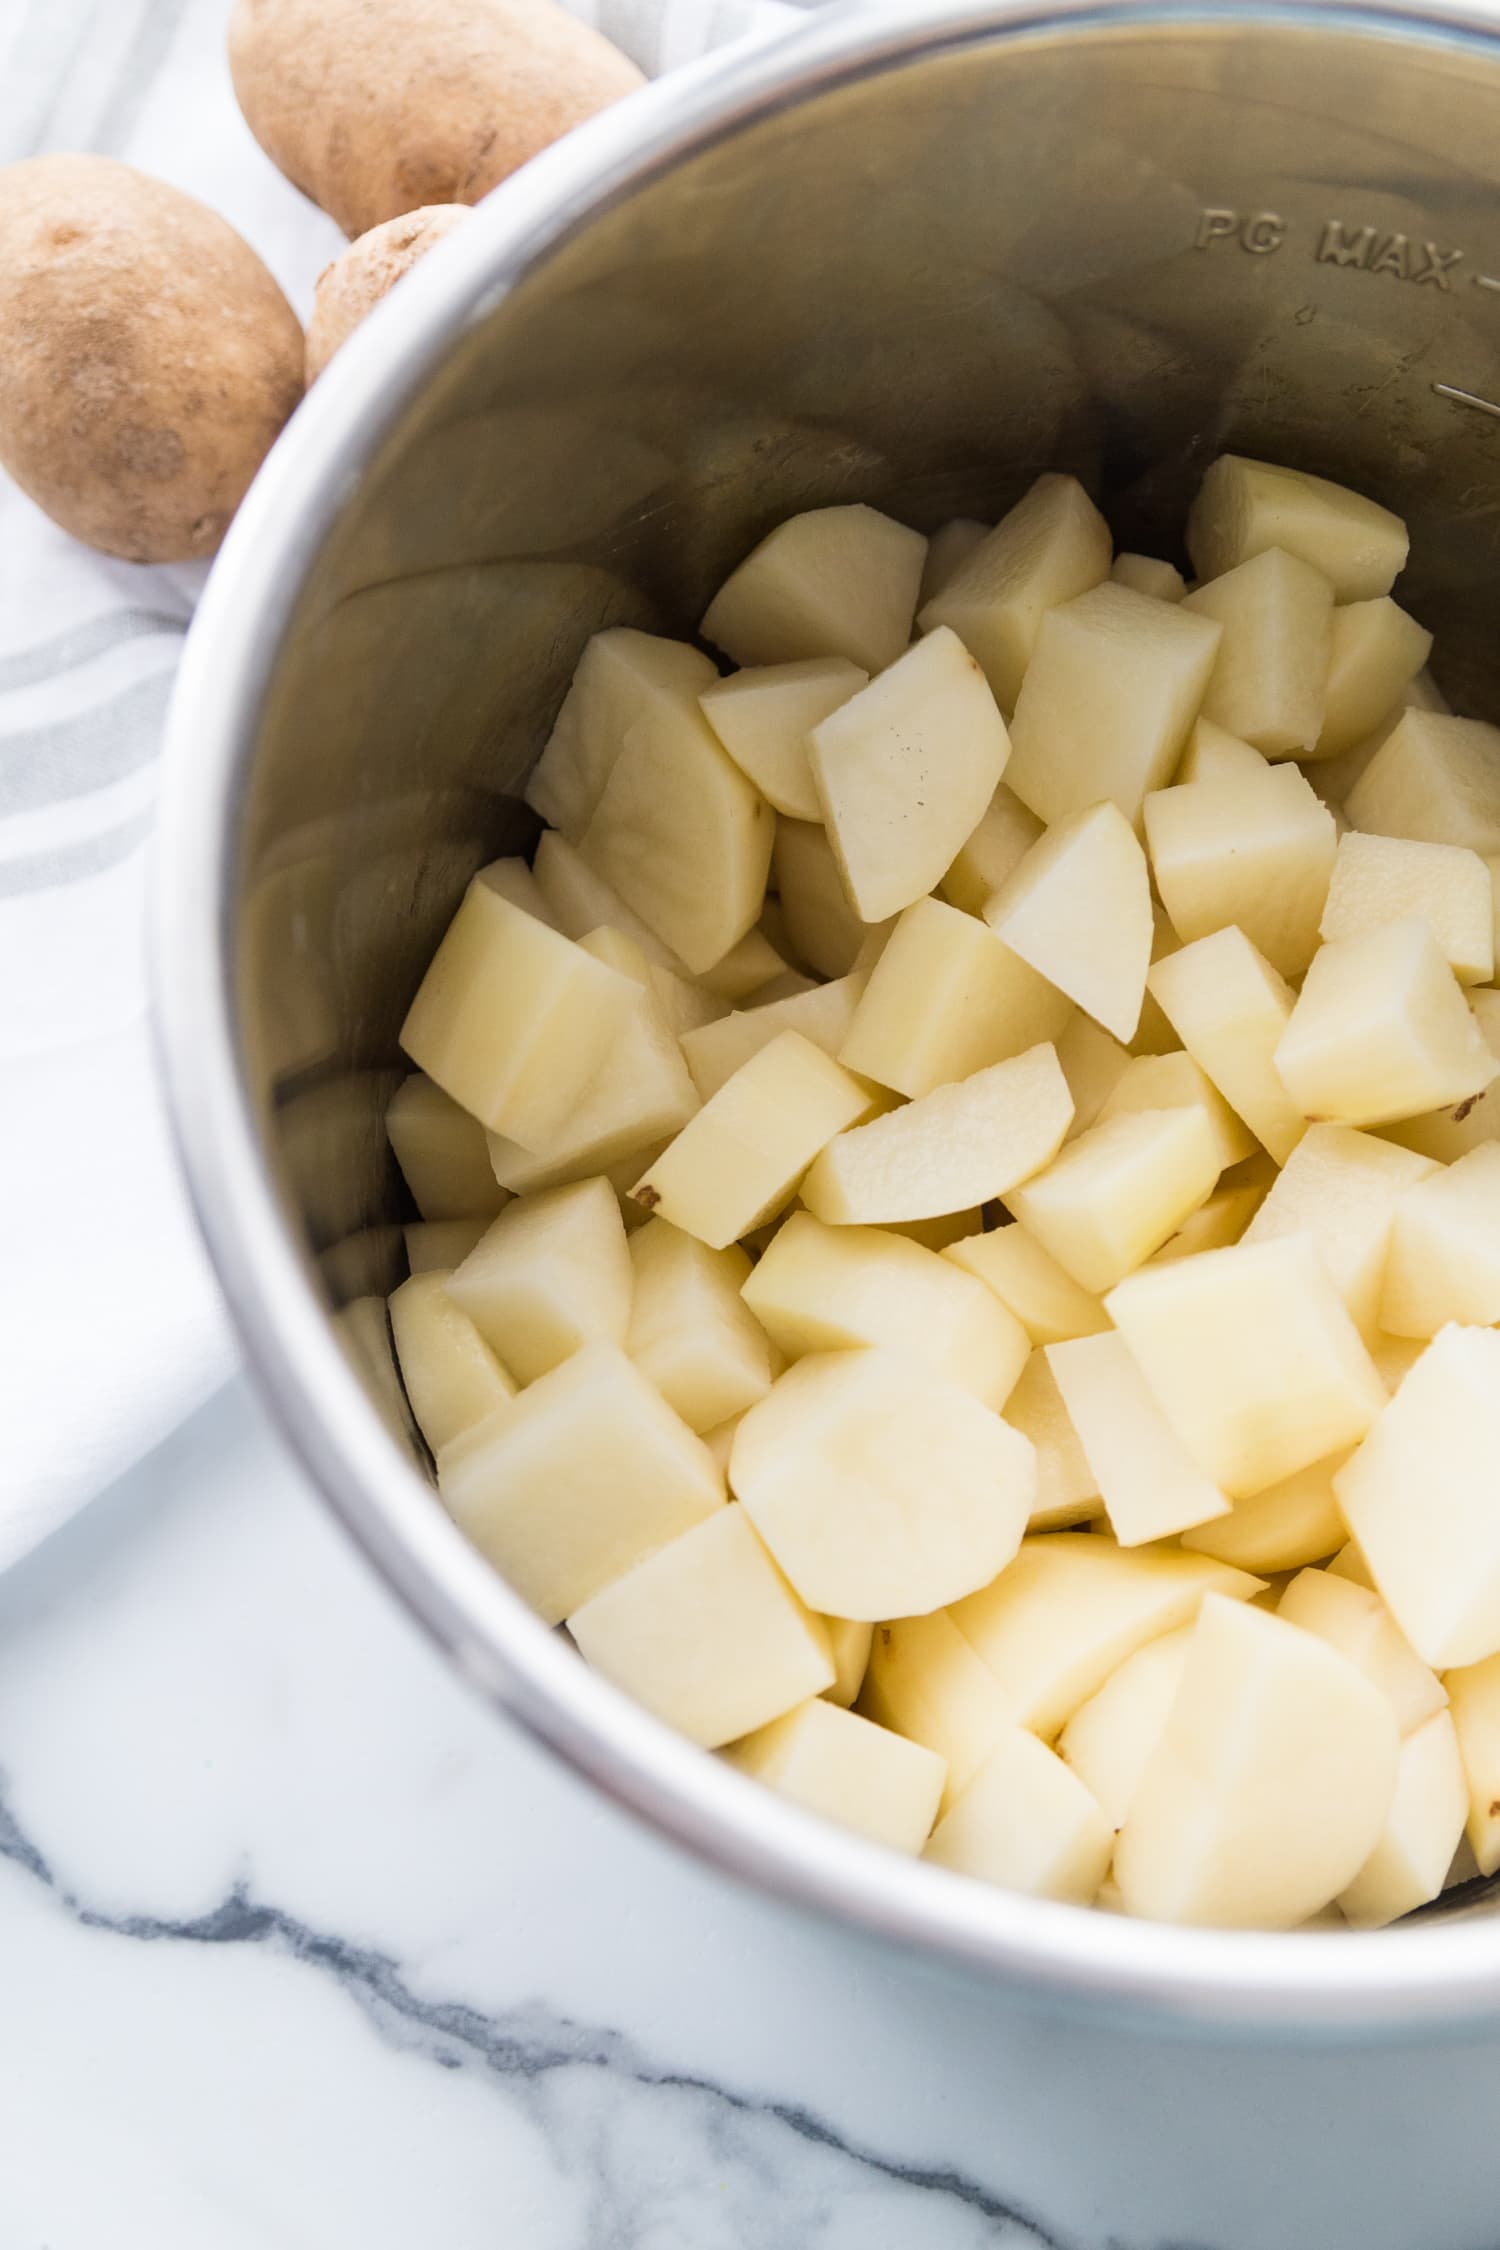 Instant pot full of peeled and diced potatoes on a white marble background with whole potatoes on the side.